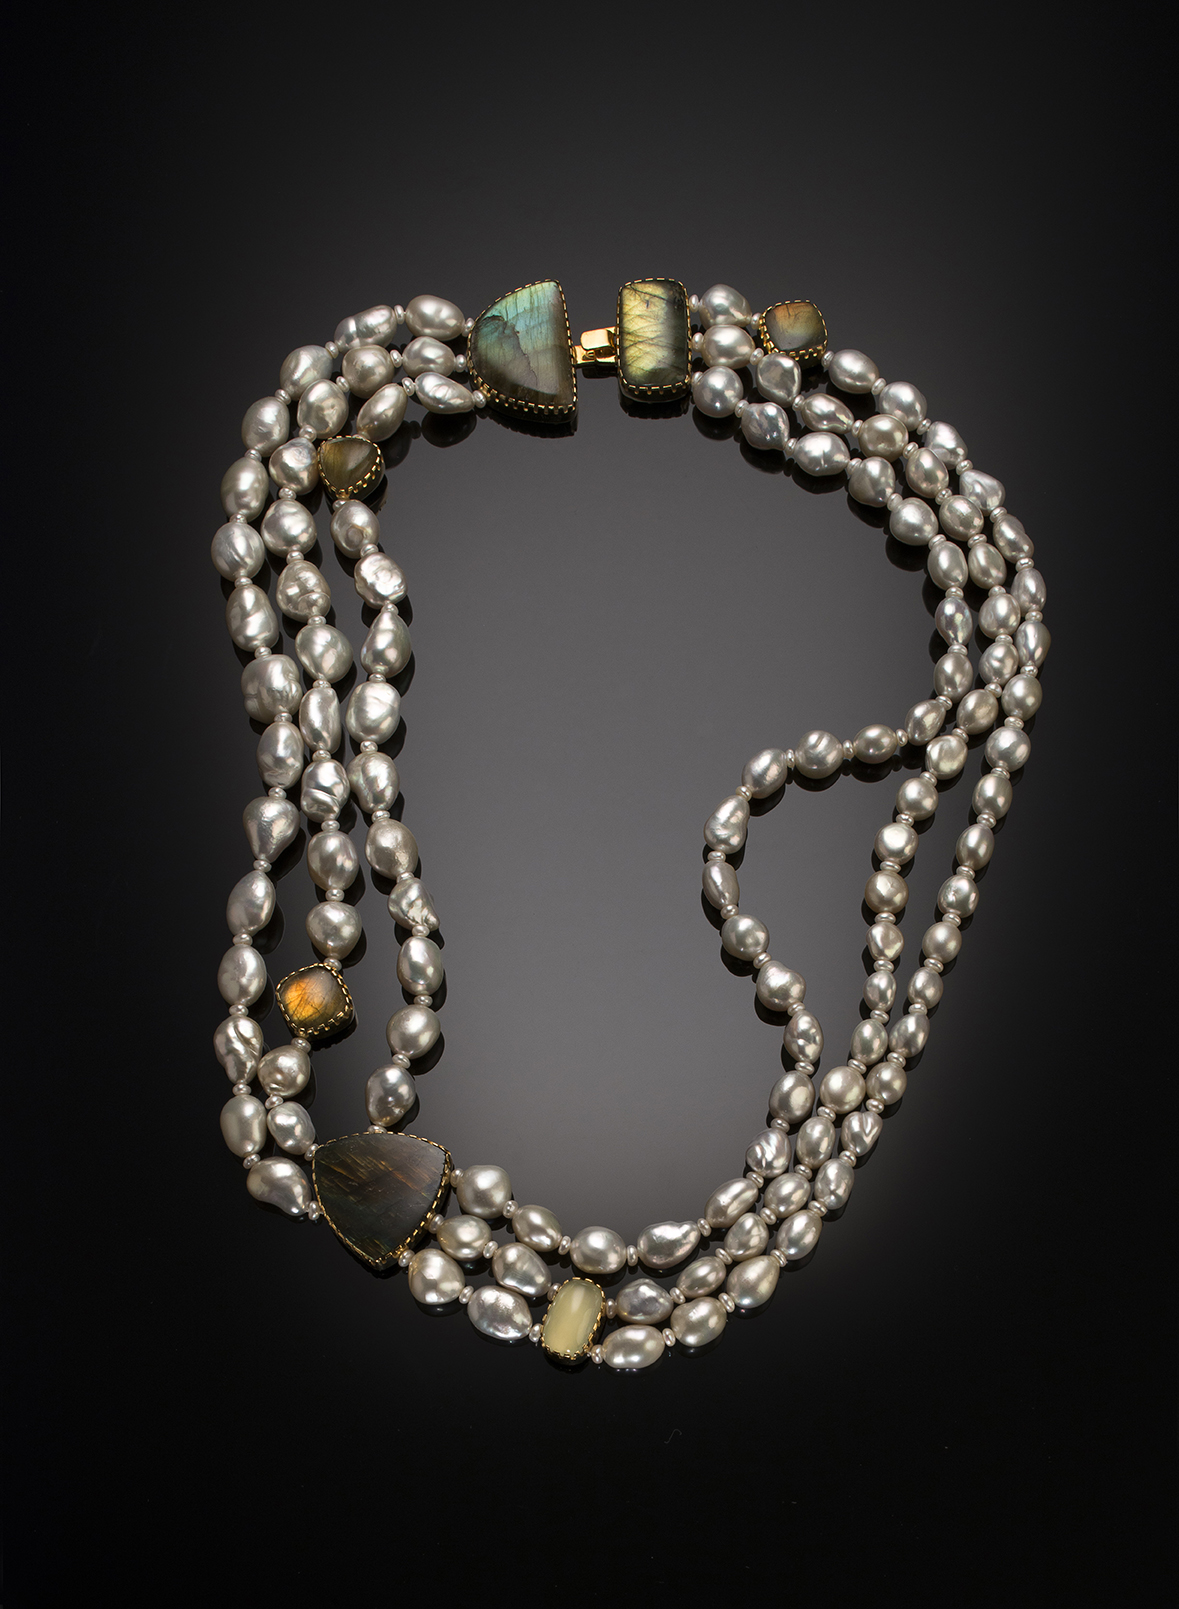 A silver and gold necklace with stones and beads.